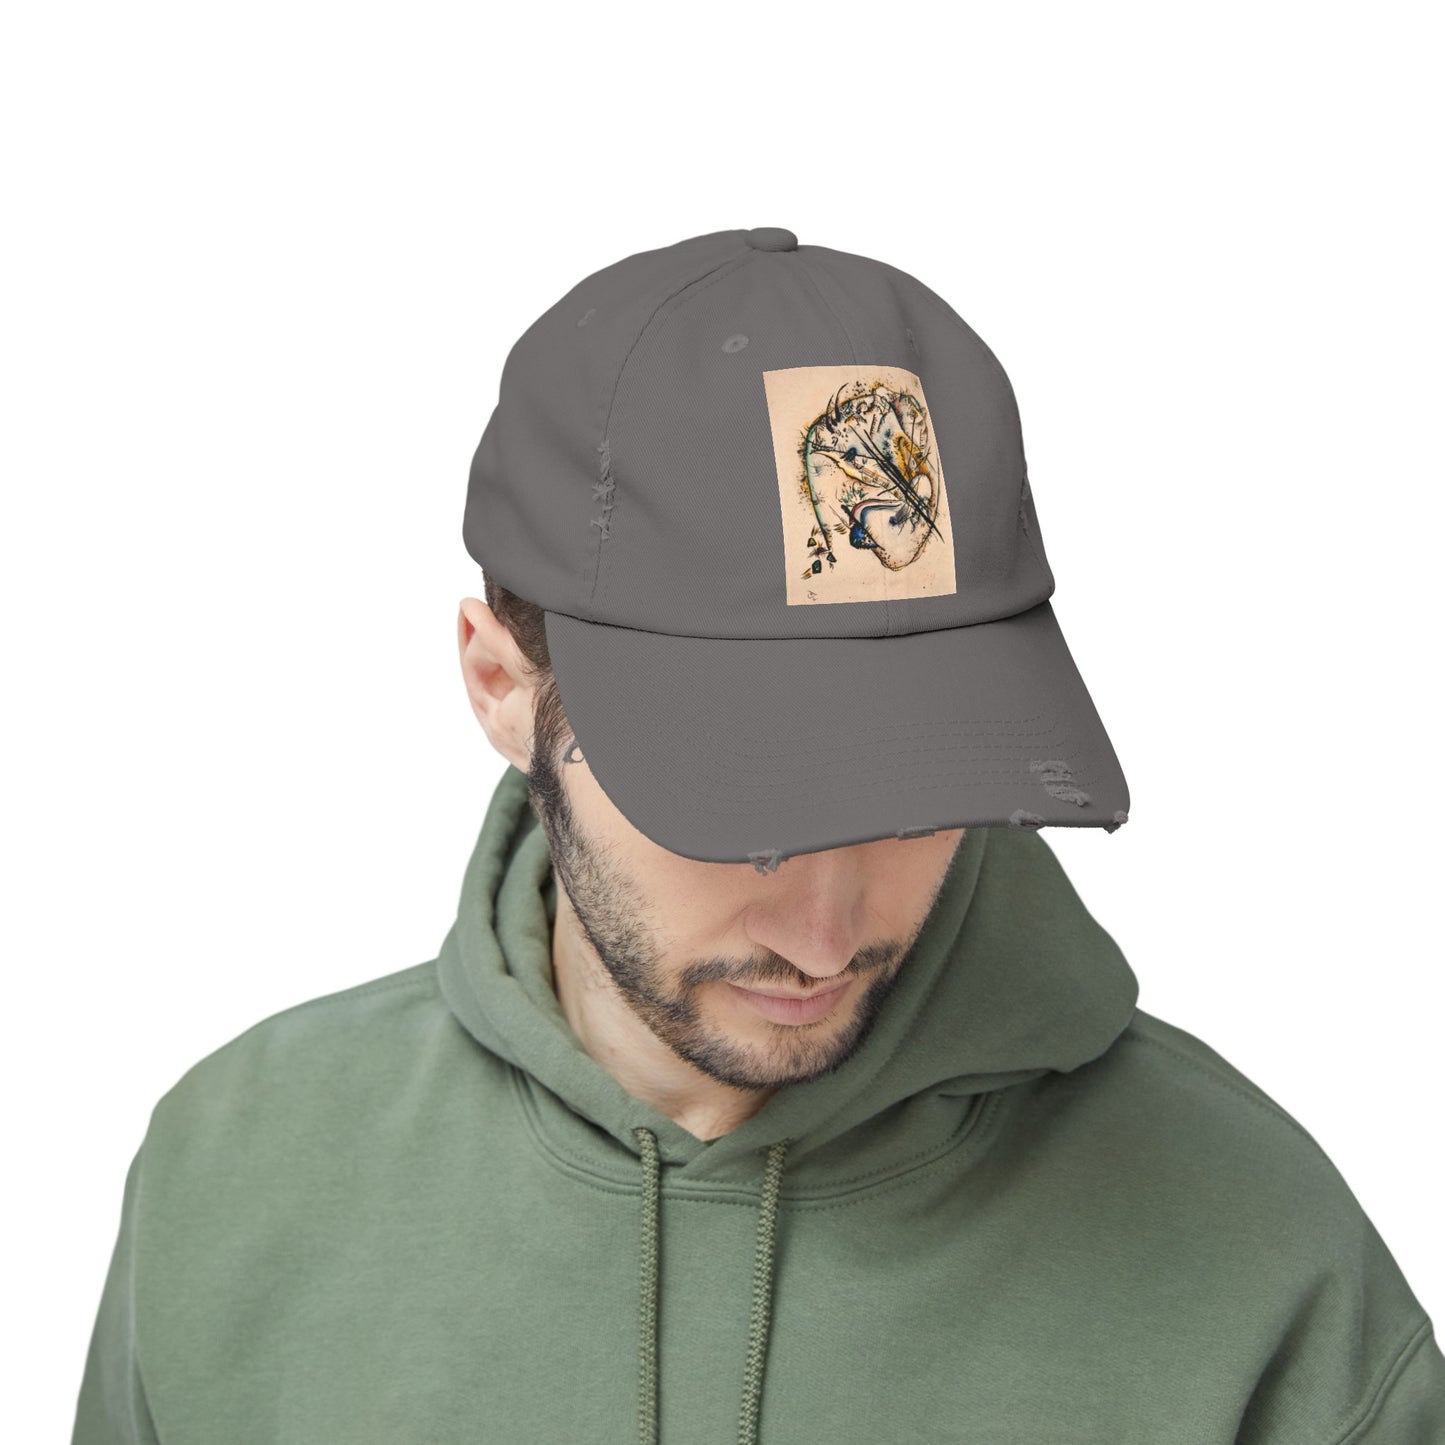 a man wearing a hat with a tiger on it